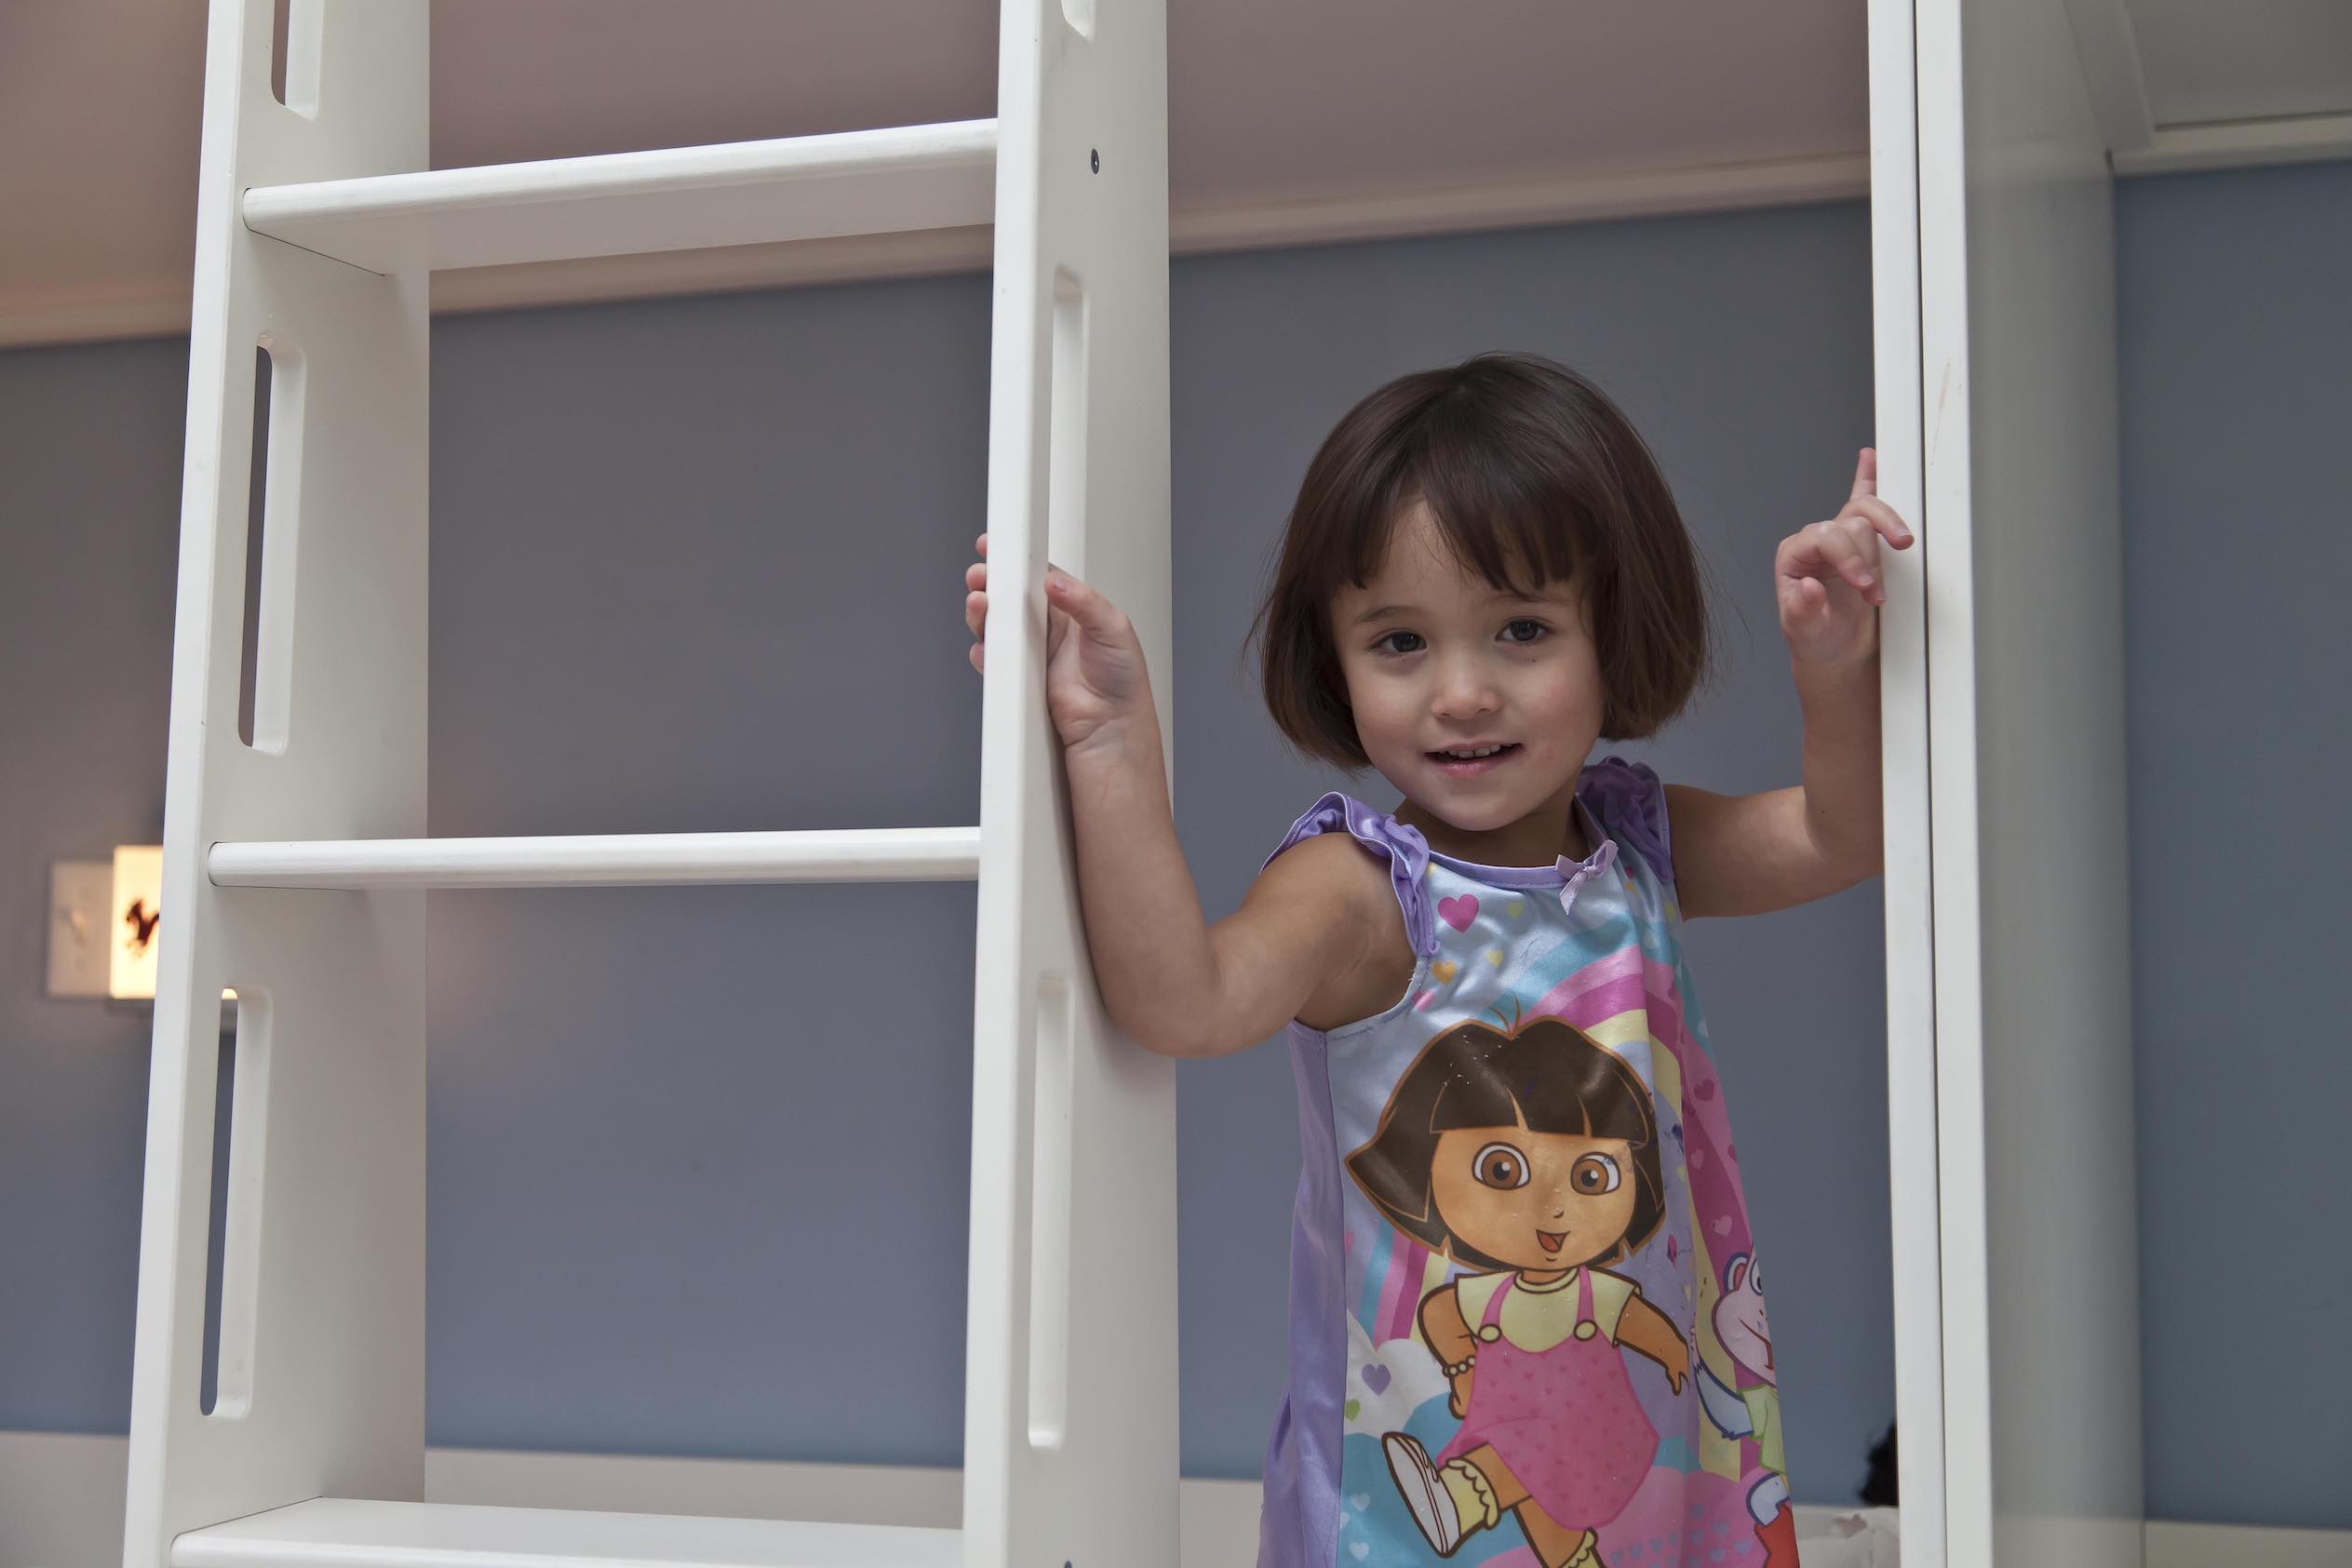 Young girl in a colorful dress smiling and holding onto white bunk bed ladders in a blue room.